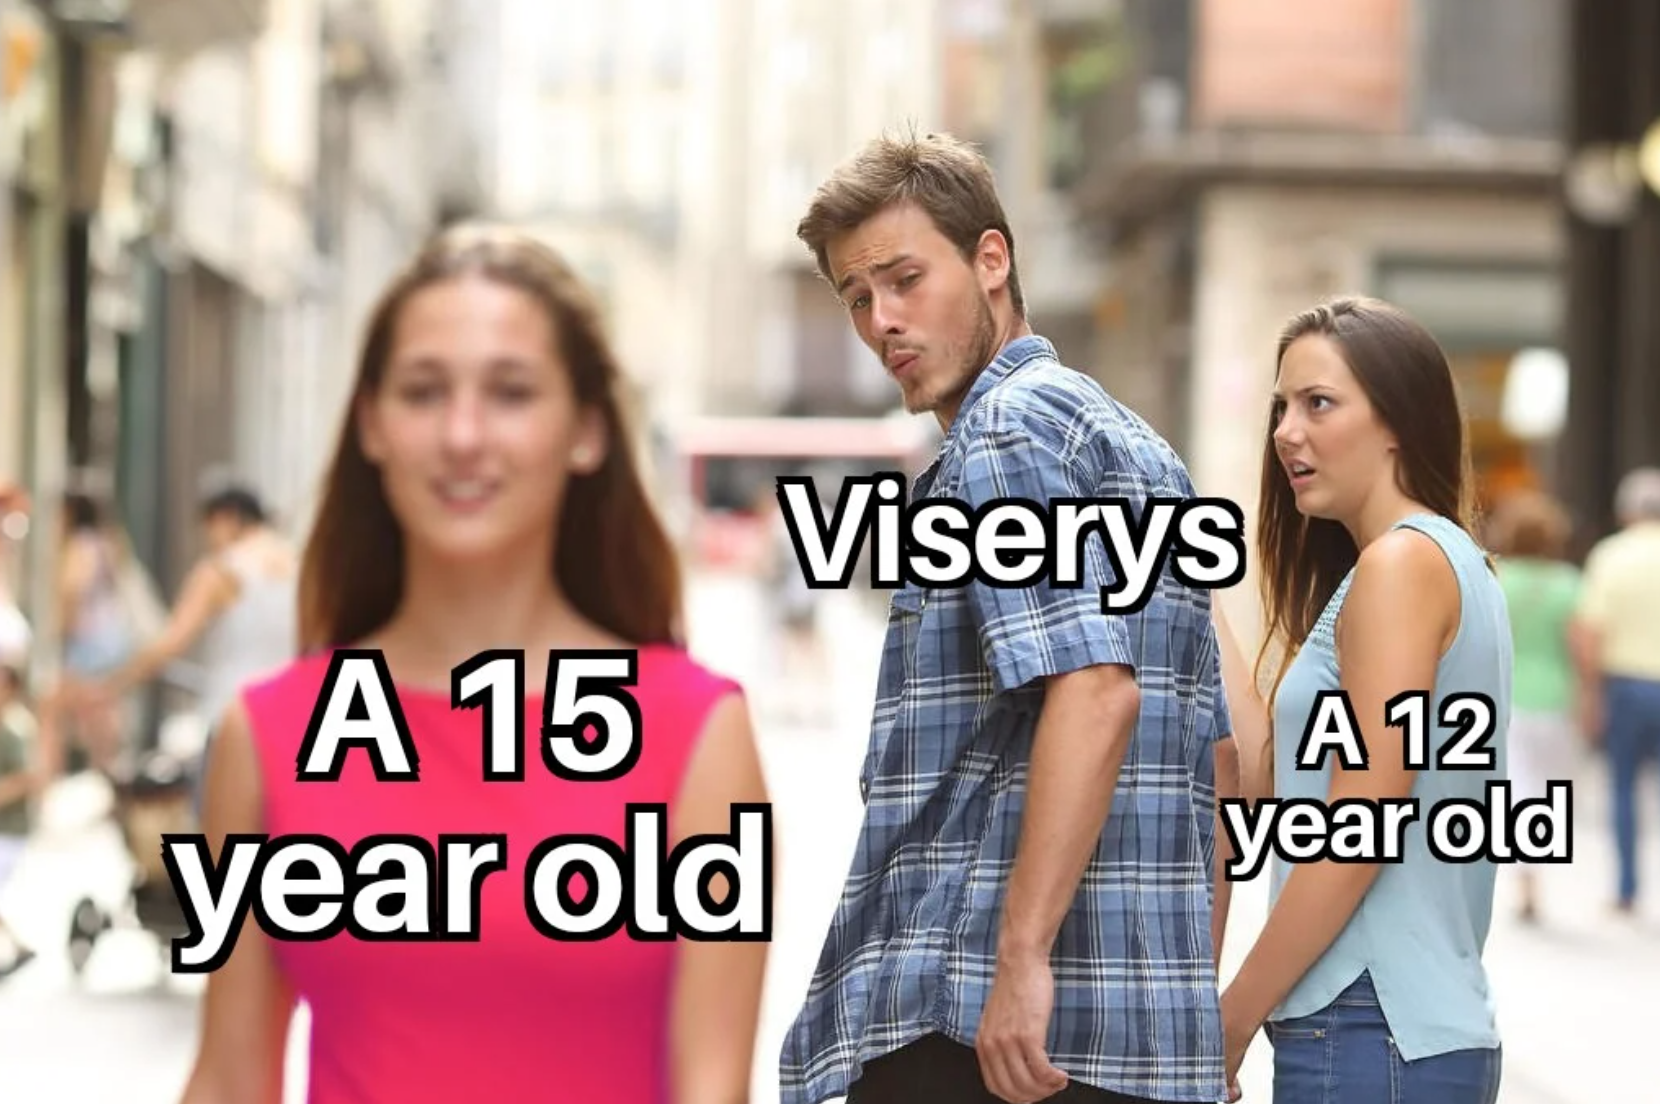 House of the Dragon Episode 2 memes - latex memes beamer - A 15 year old Viserys A 12 year old